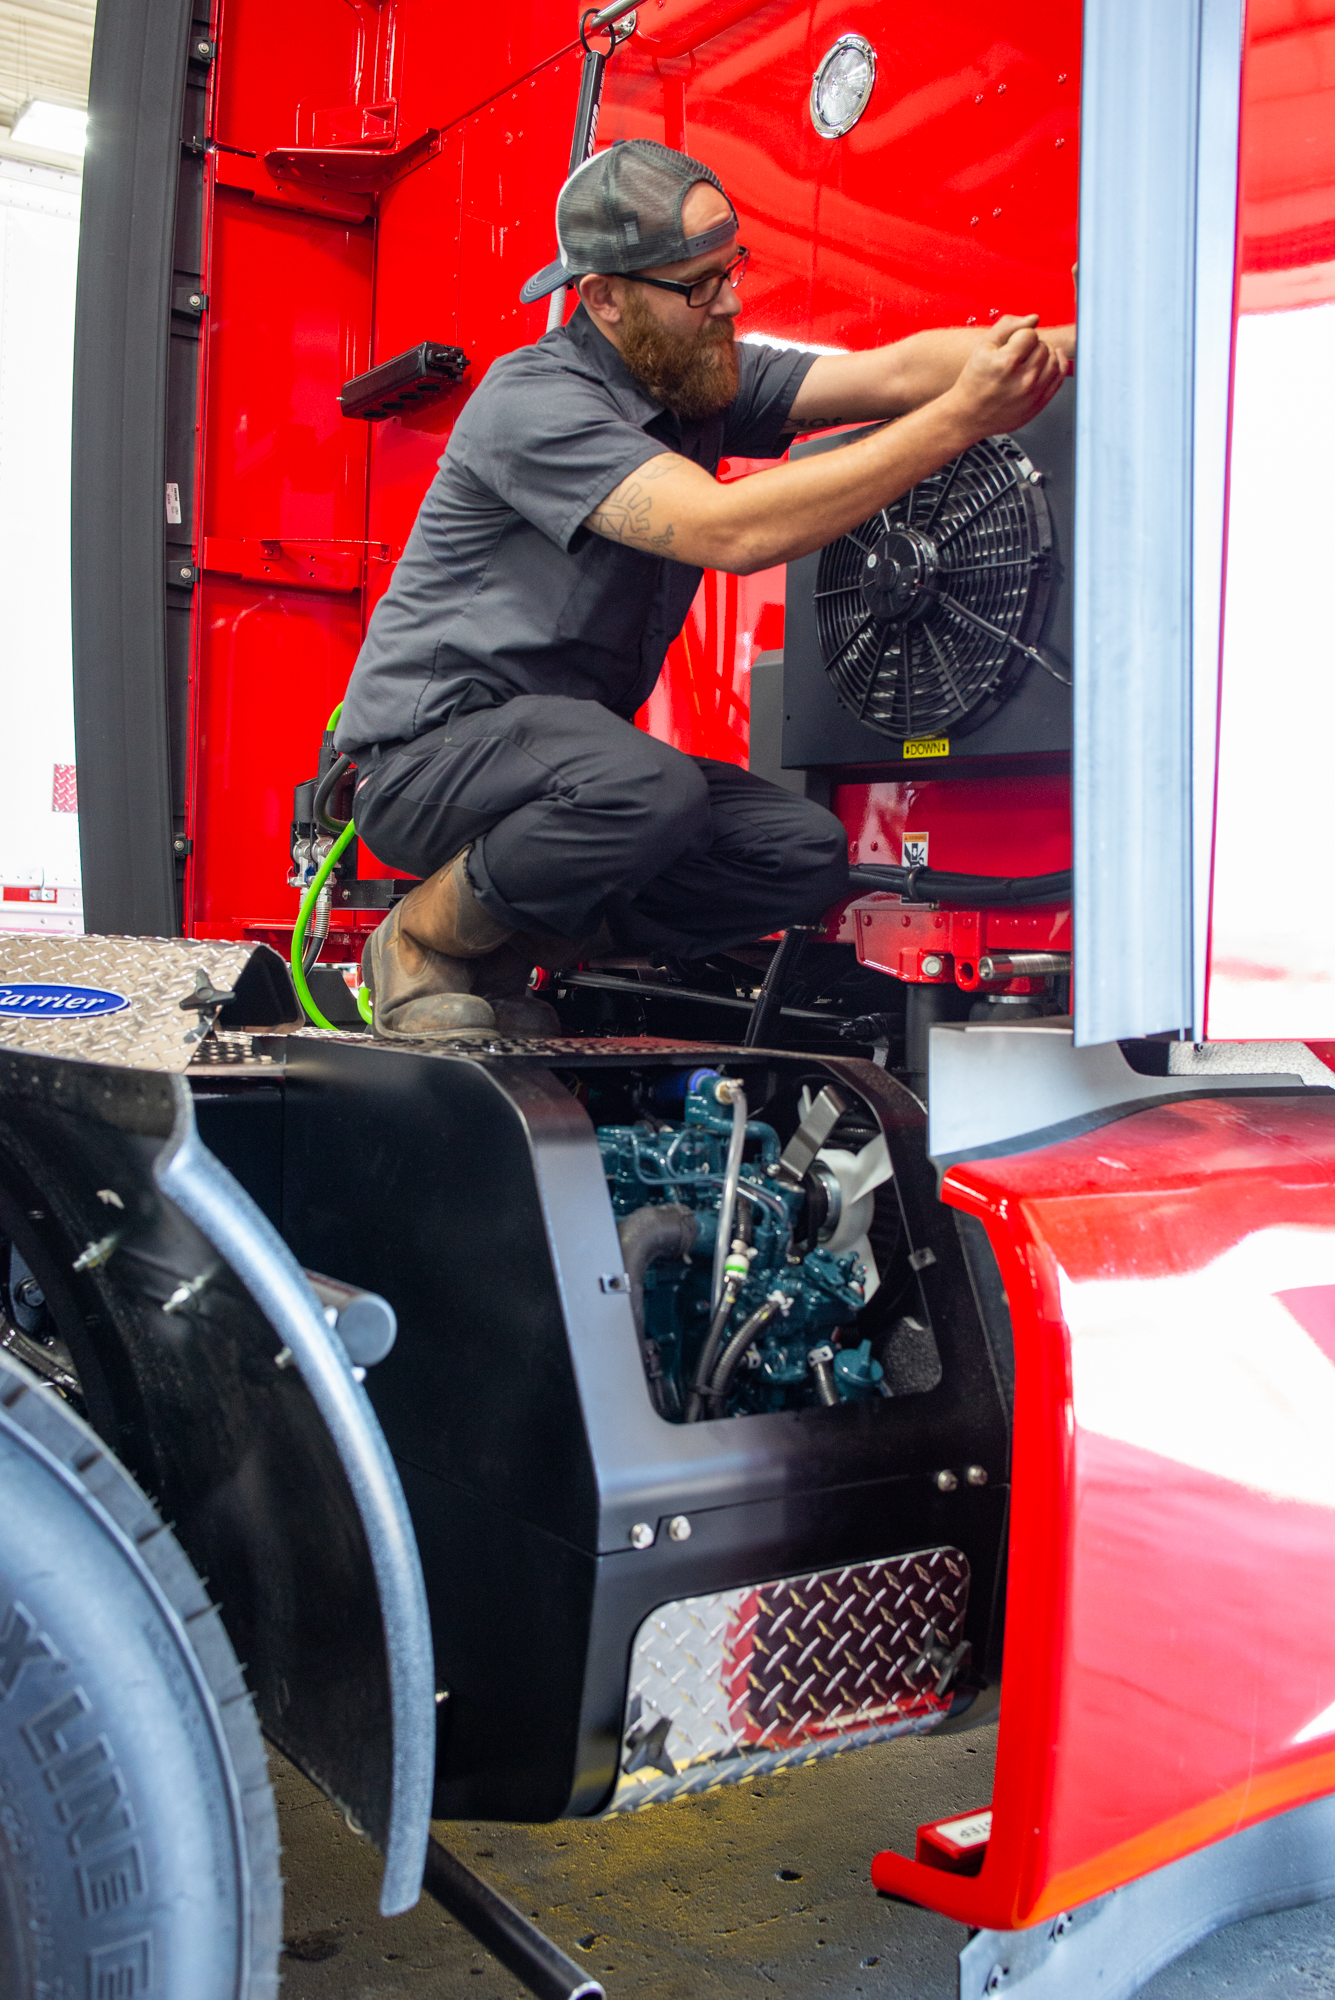 Crosspoint Power and Refrigeration technician working on a Carrier APU on a red truck